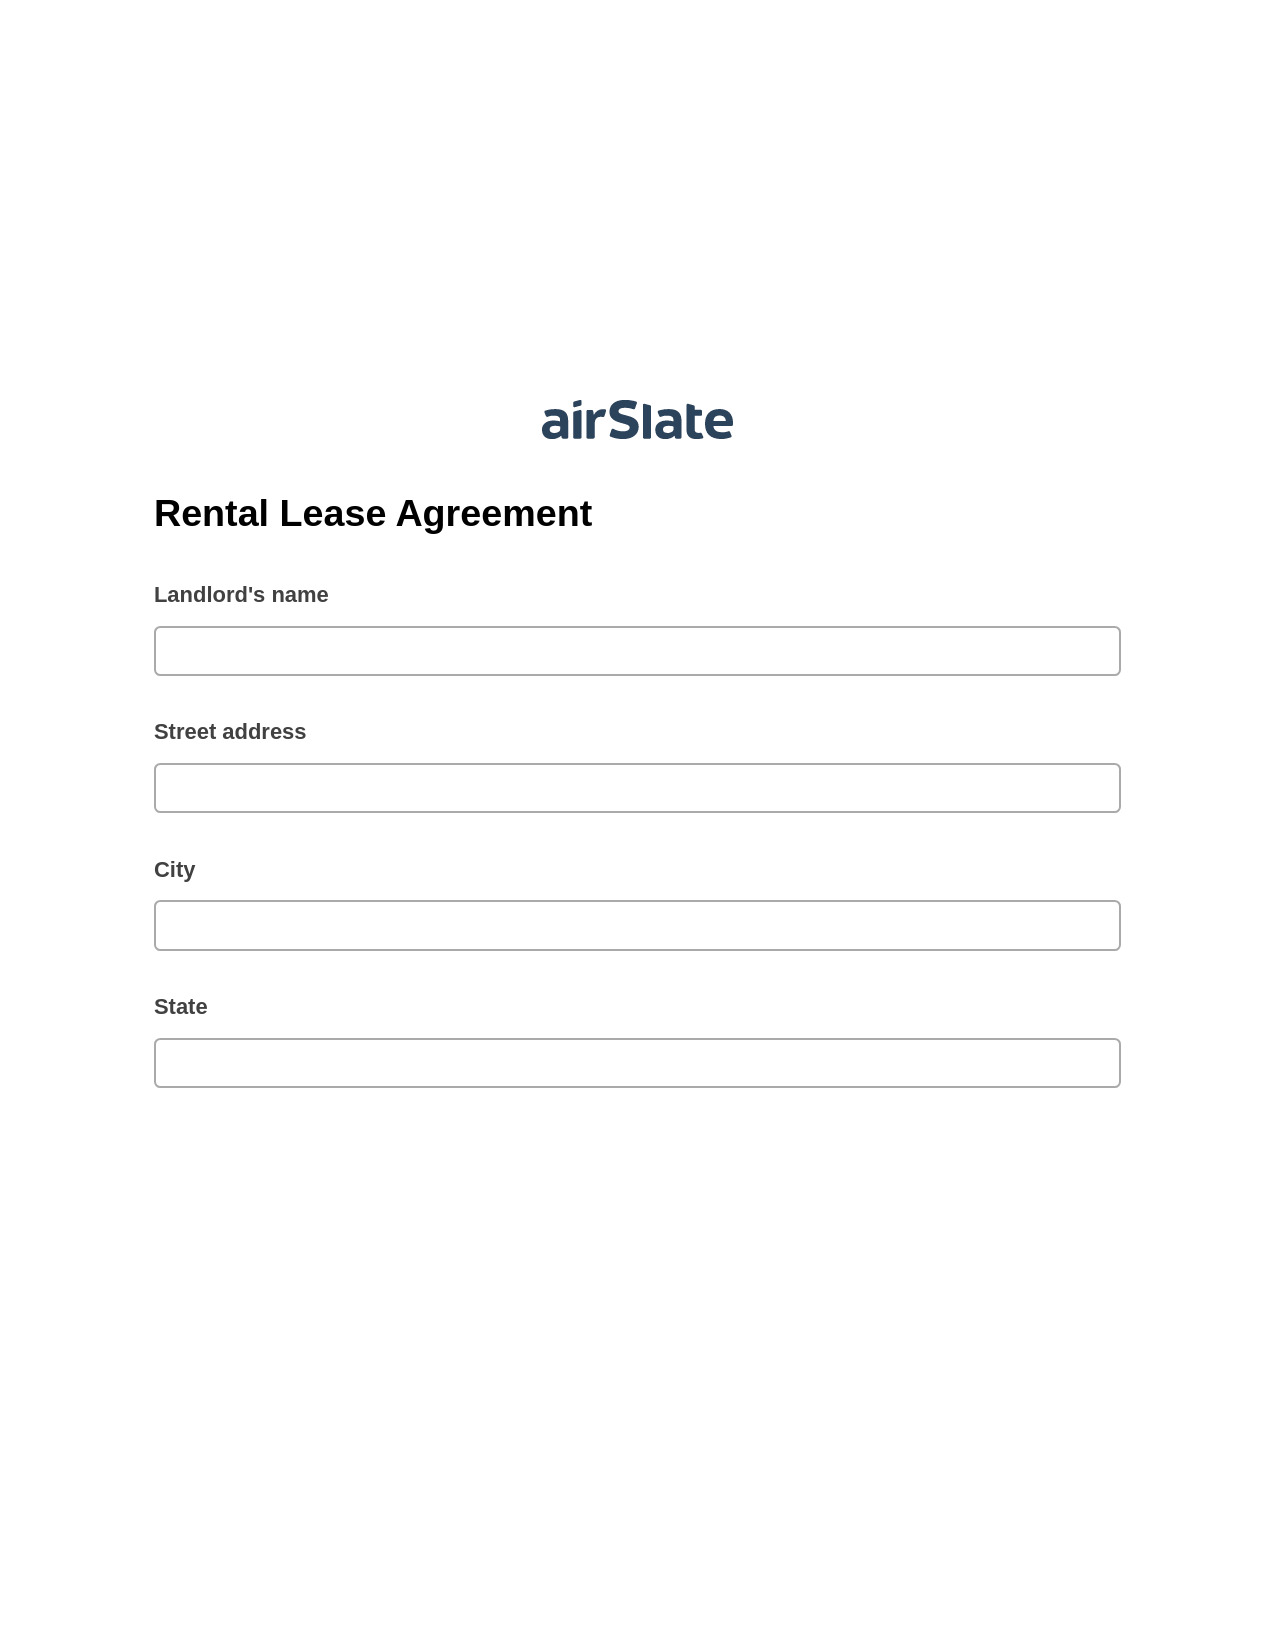 Rental Lease Agreement Pre-fill from CSV File Dropdown Options Bot, Update NetSuite Records Bot, Webhook Postfinish Bot